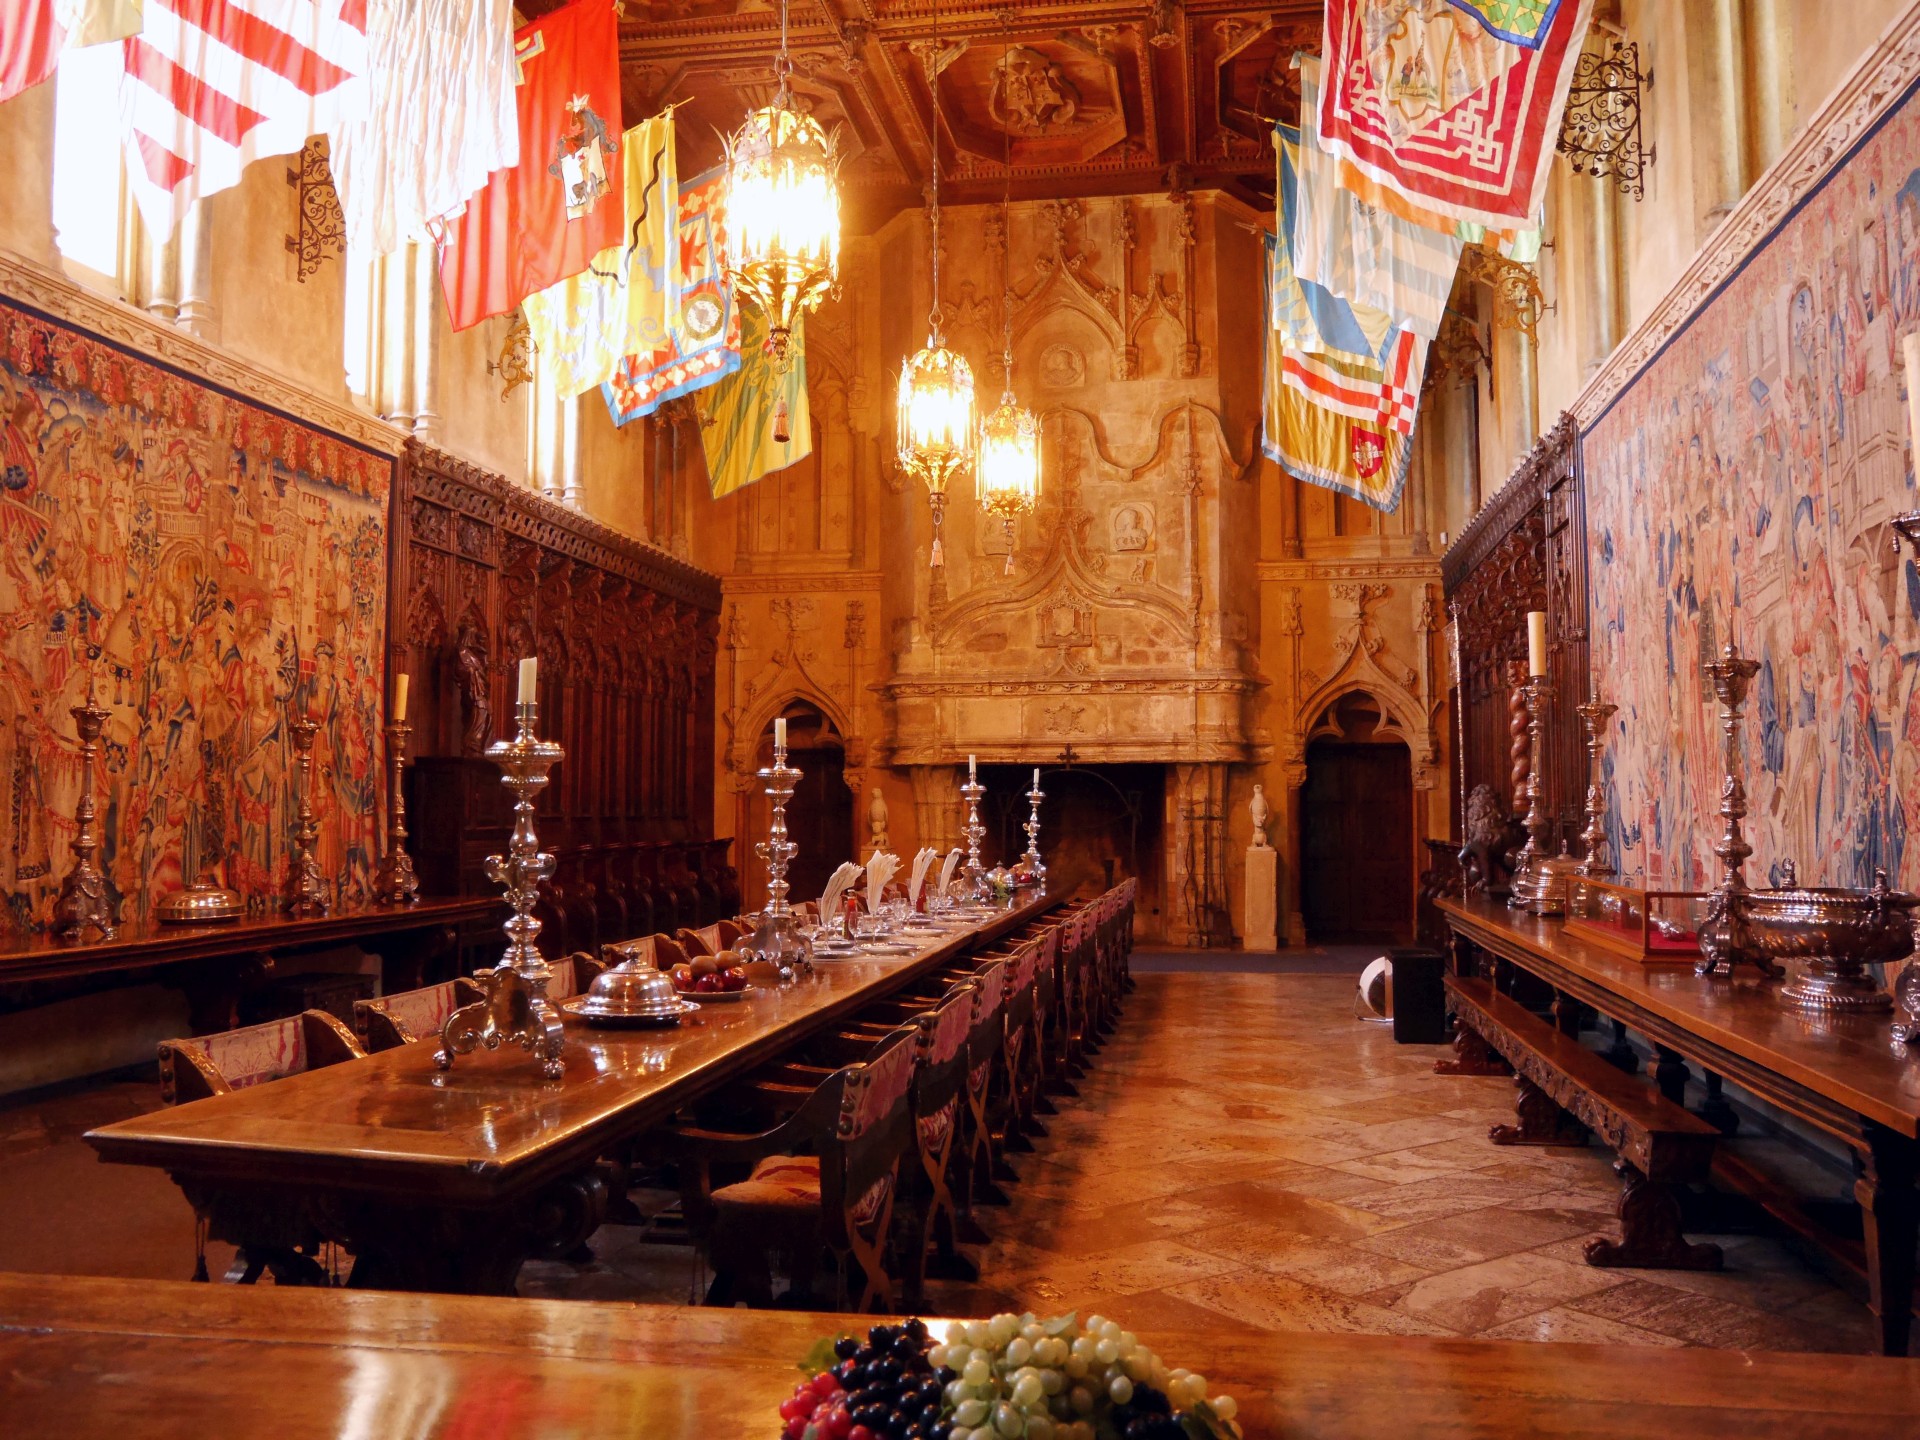 File:Refectory with whole table and Fireplace.jpg - Wikimedia Commons